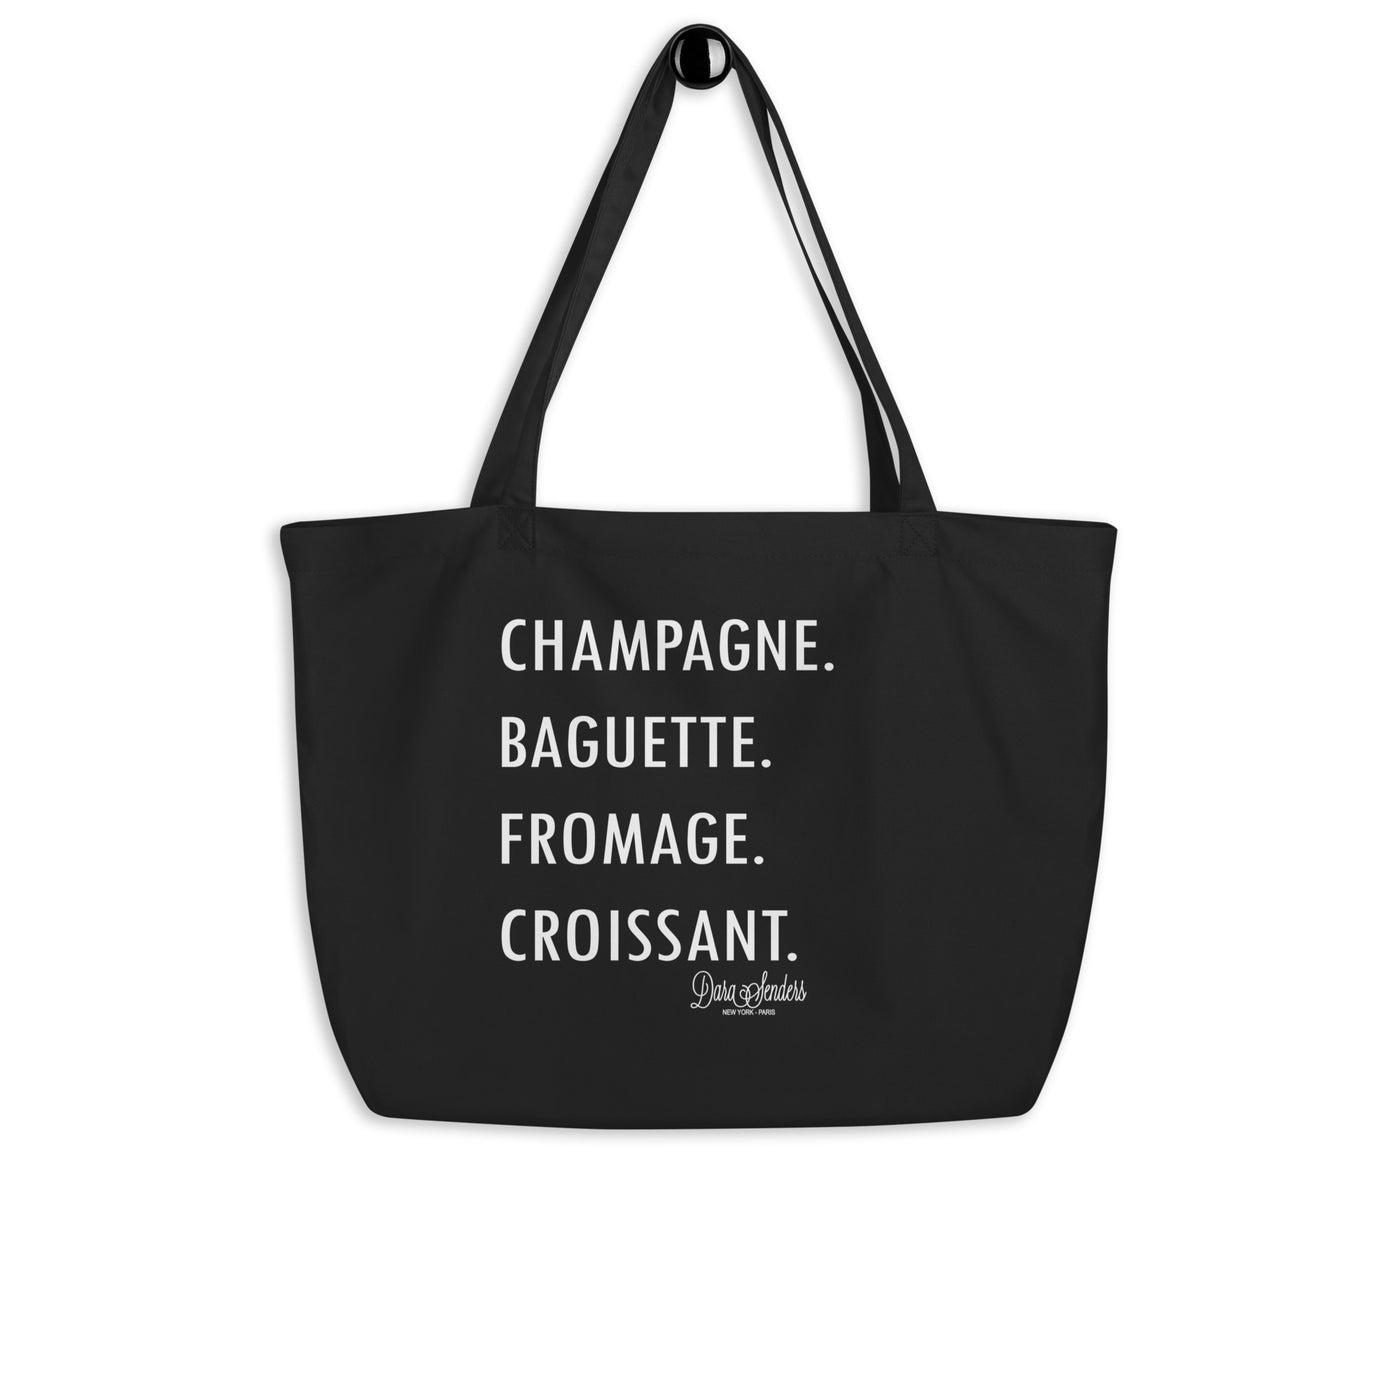 GOURMET LOVE (Champagne, Baguette, Fromage, Croissant) LARGE ORGANIC TOTE BAG